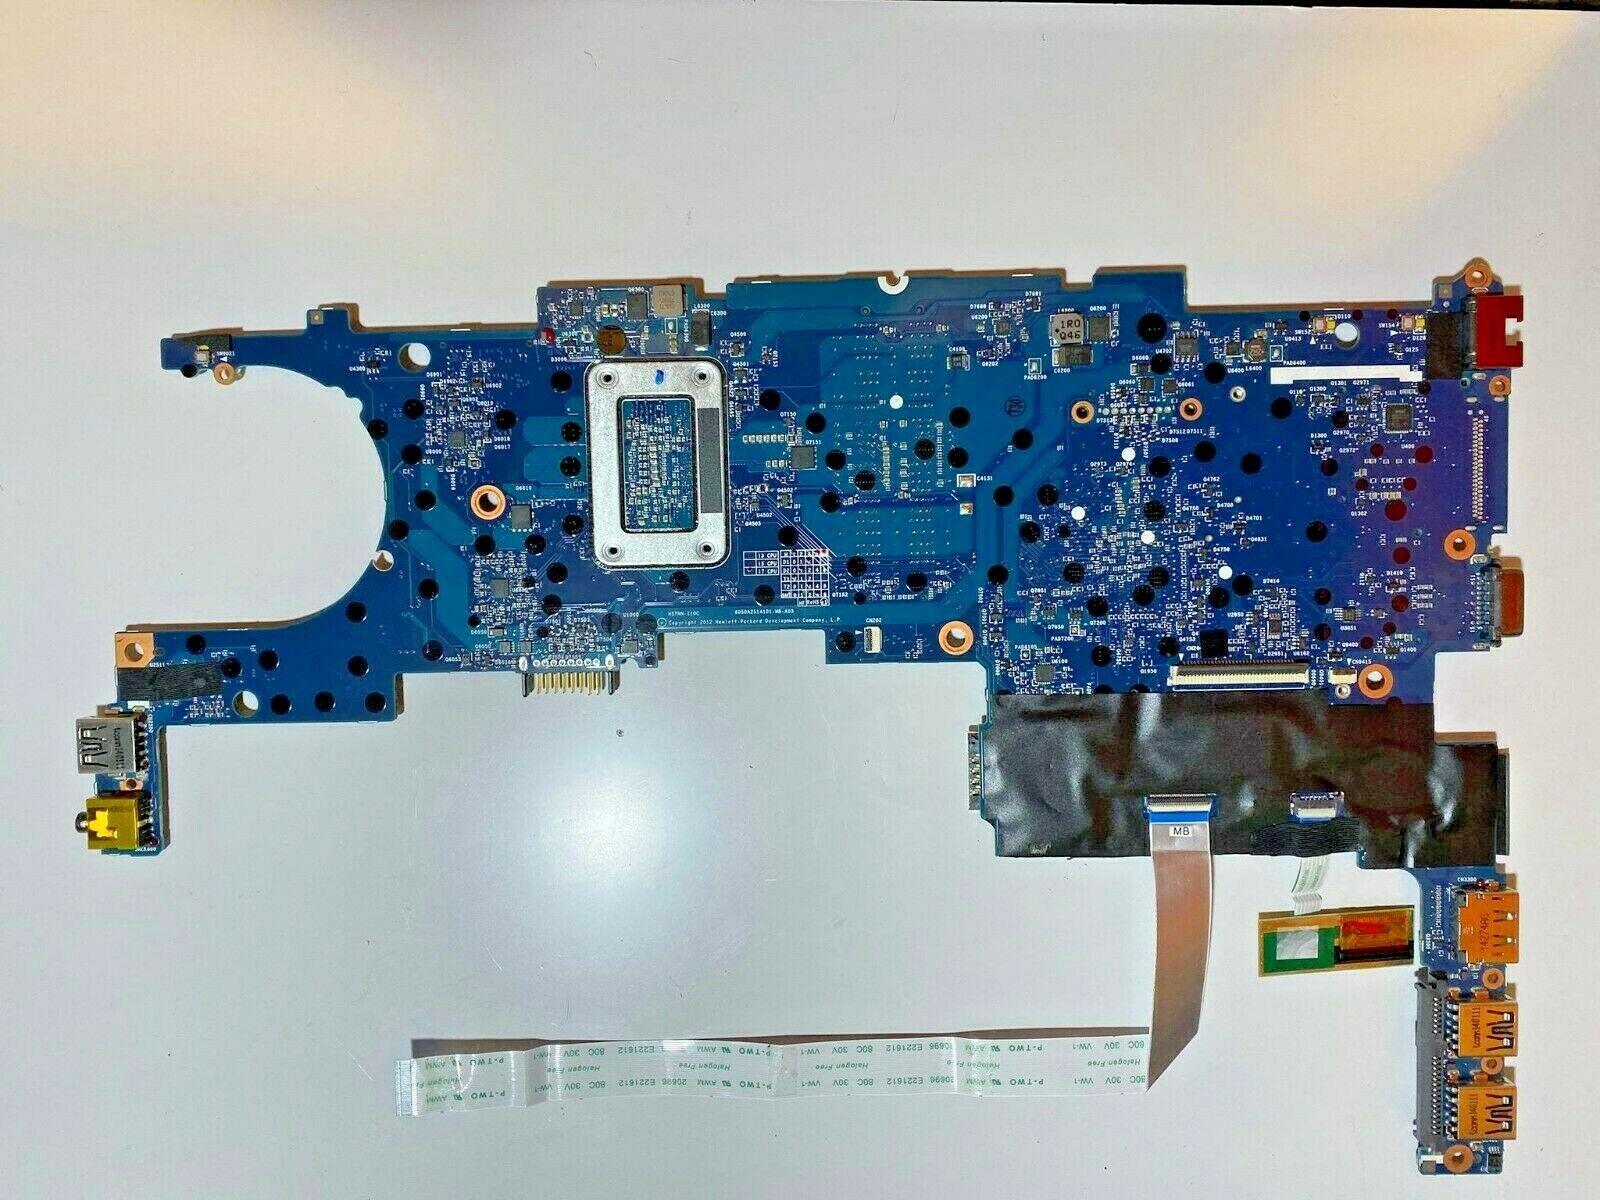 HP Elitebook Folio 9470m i7-3687U 717844-601 Motherboard Comes with exactly whats shown in the photos. Test